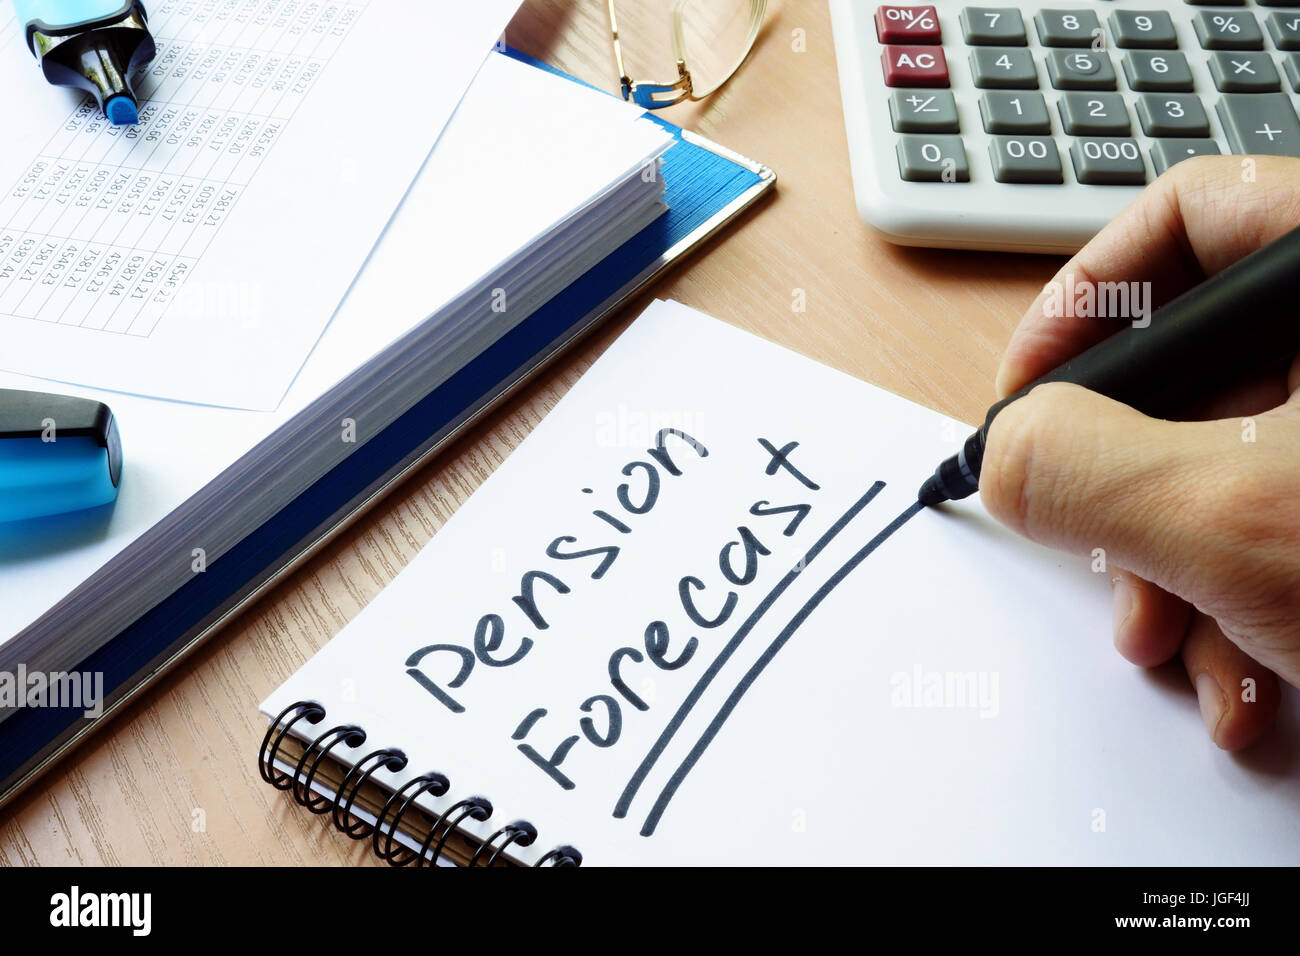 Handwriting sign pension forecast in a note. Stock Photo